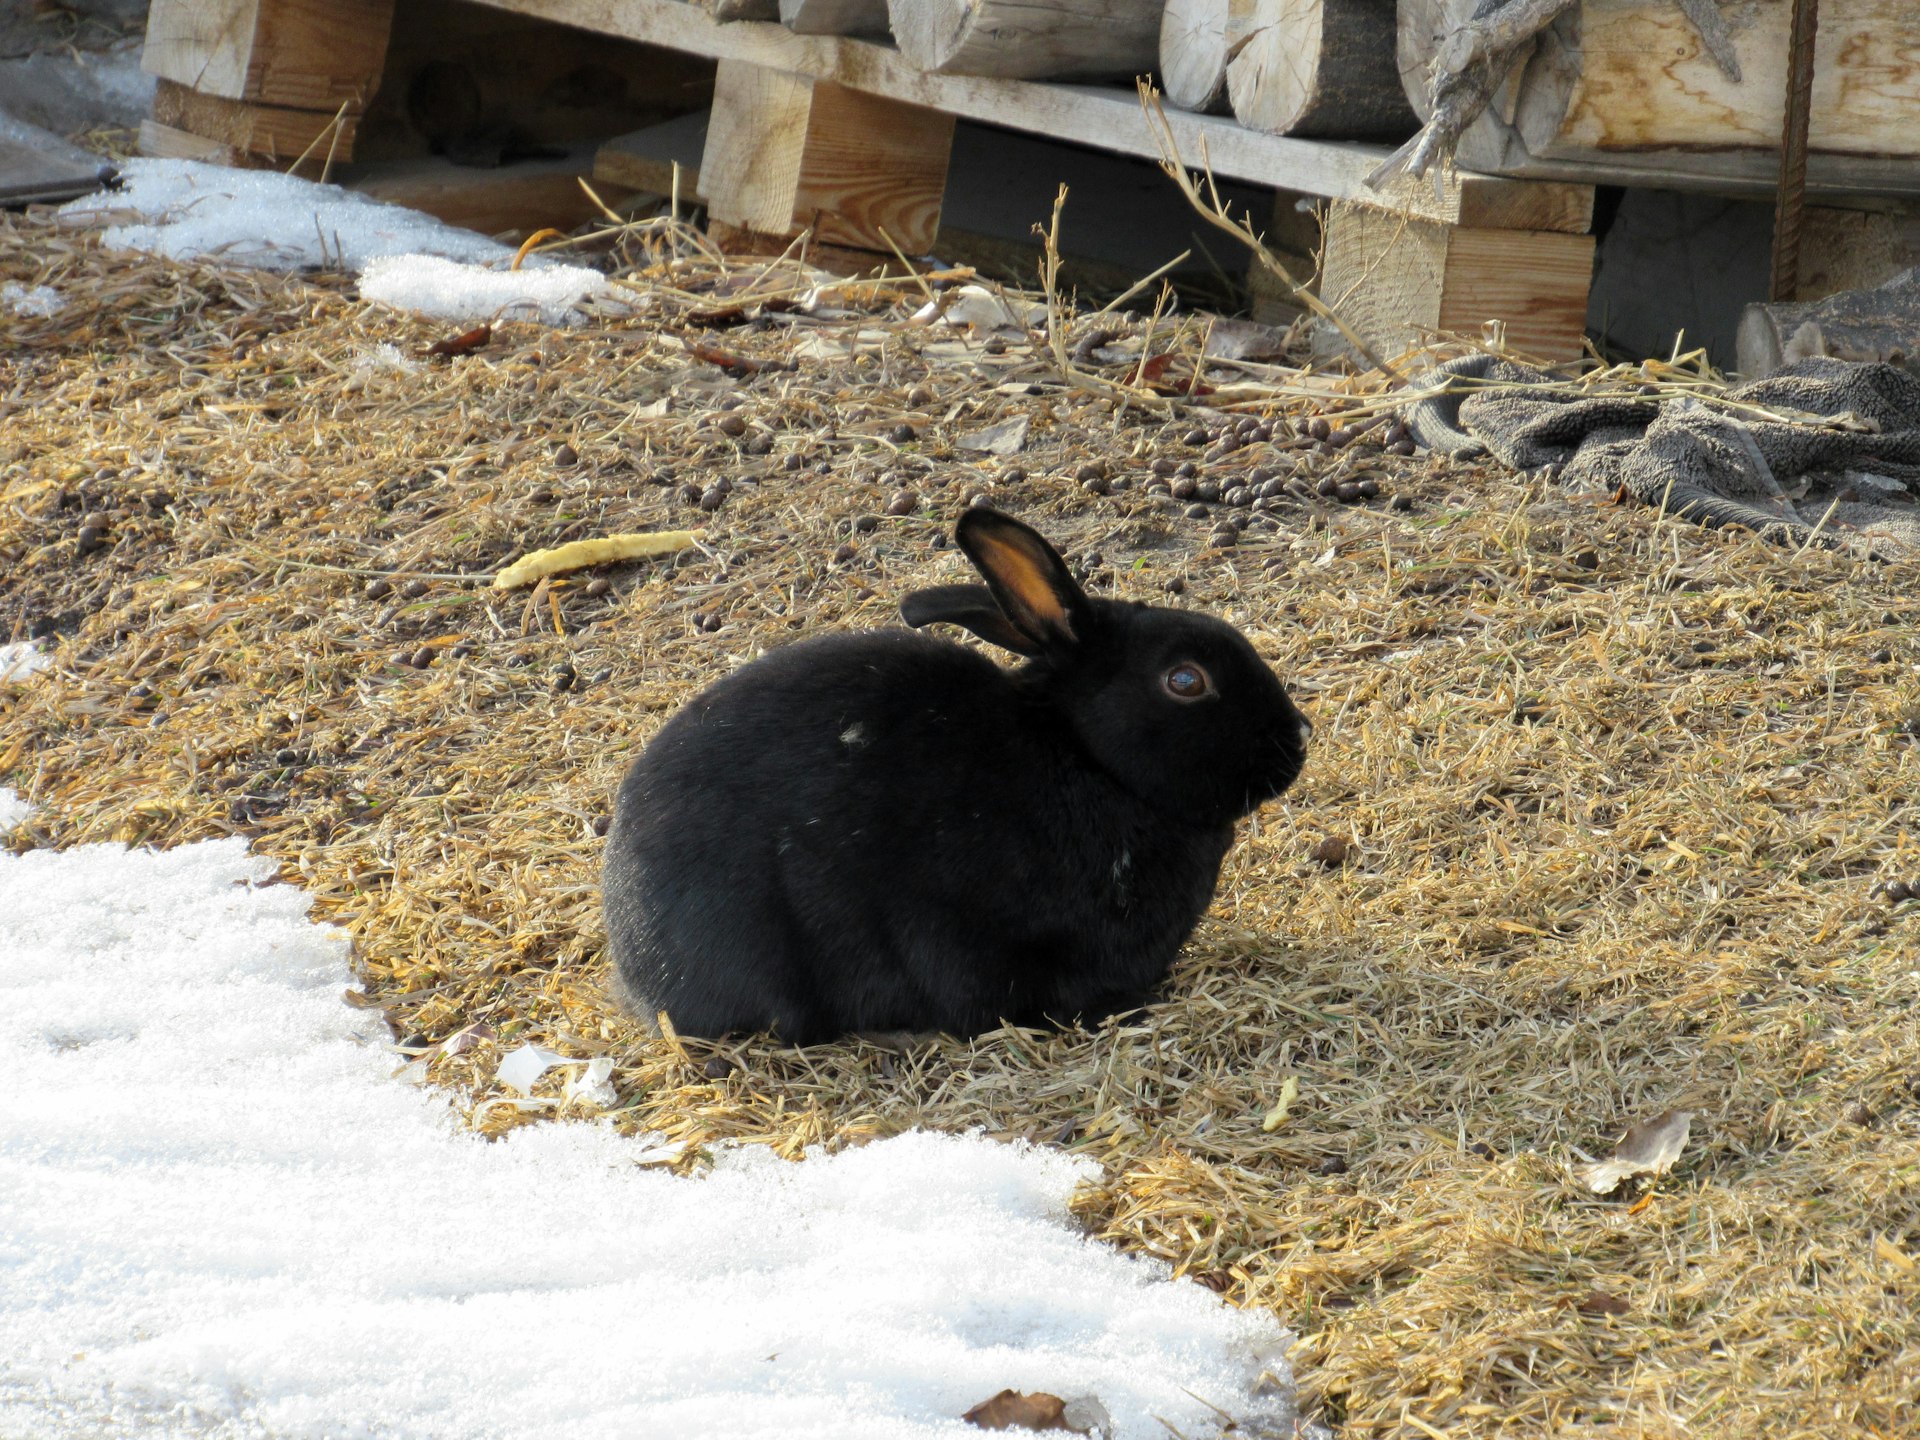 A bunny sits in dry grass near snow